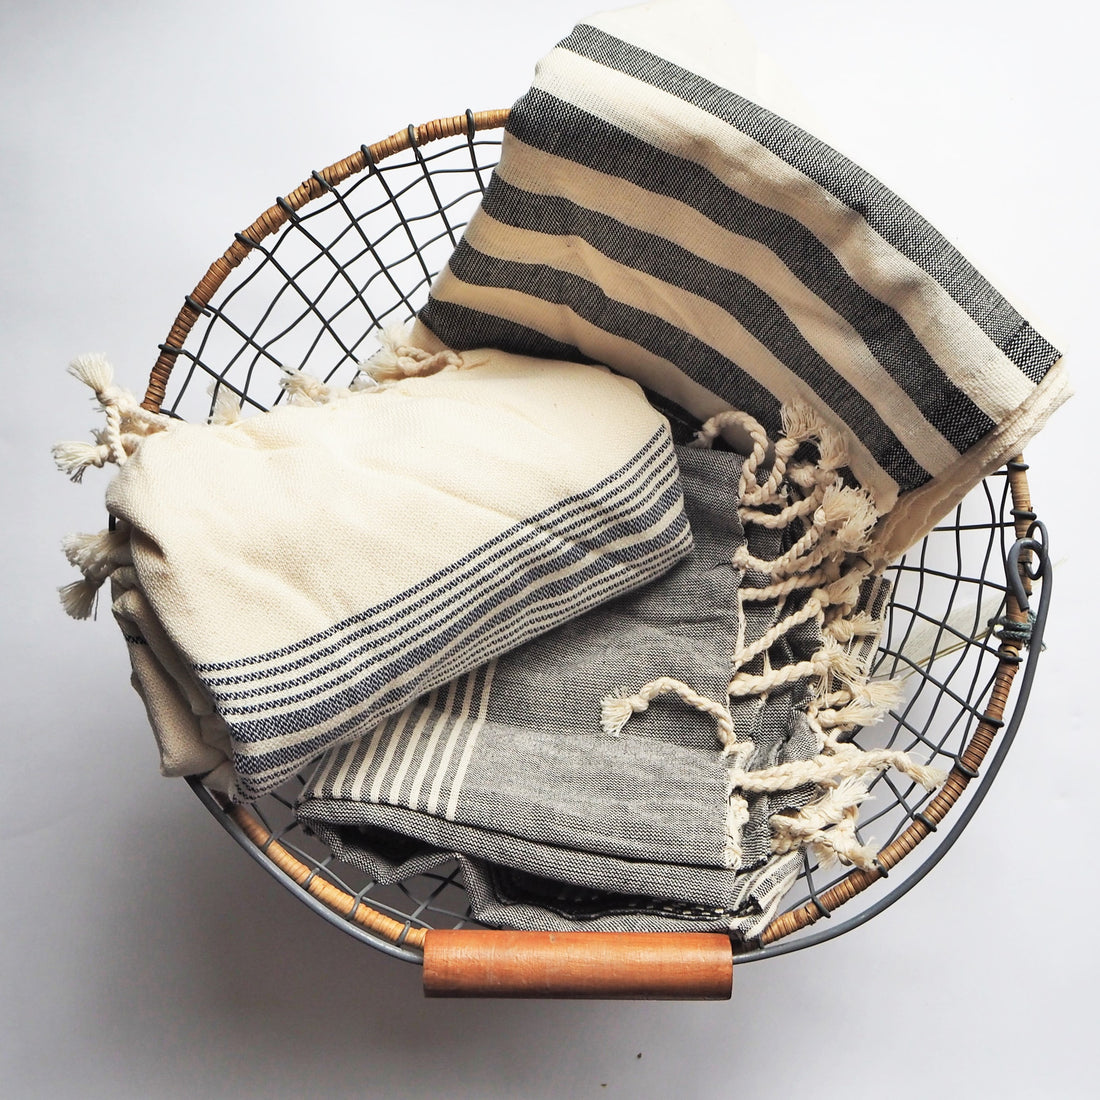 How To Receive Your FREE Turkish Towel